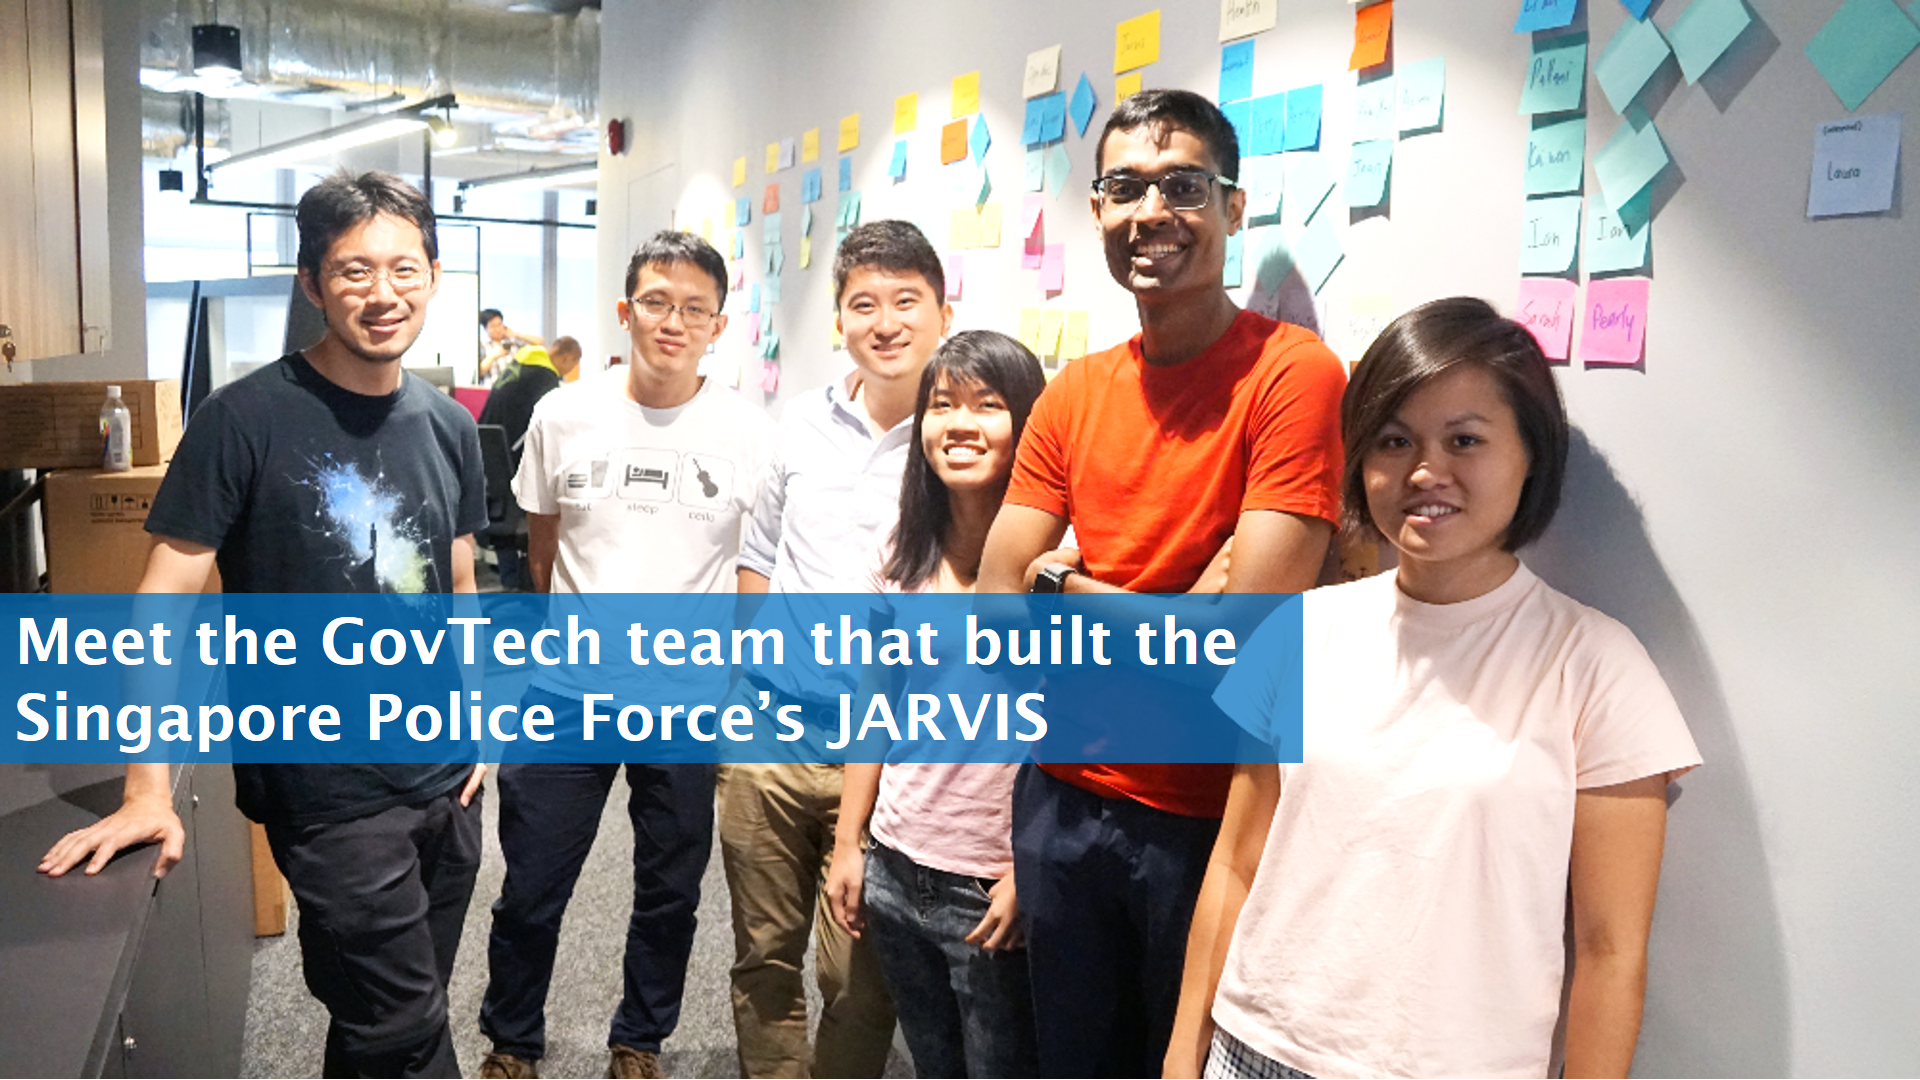 Meet the GovTech team that built the Singapore Police Force’s JARVIS